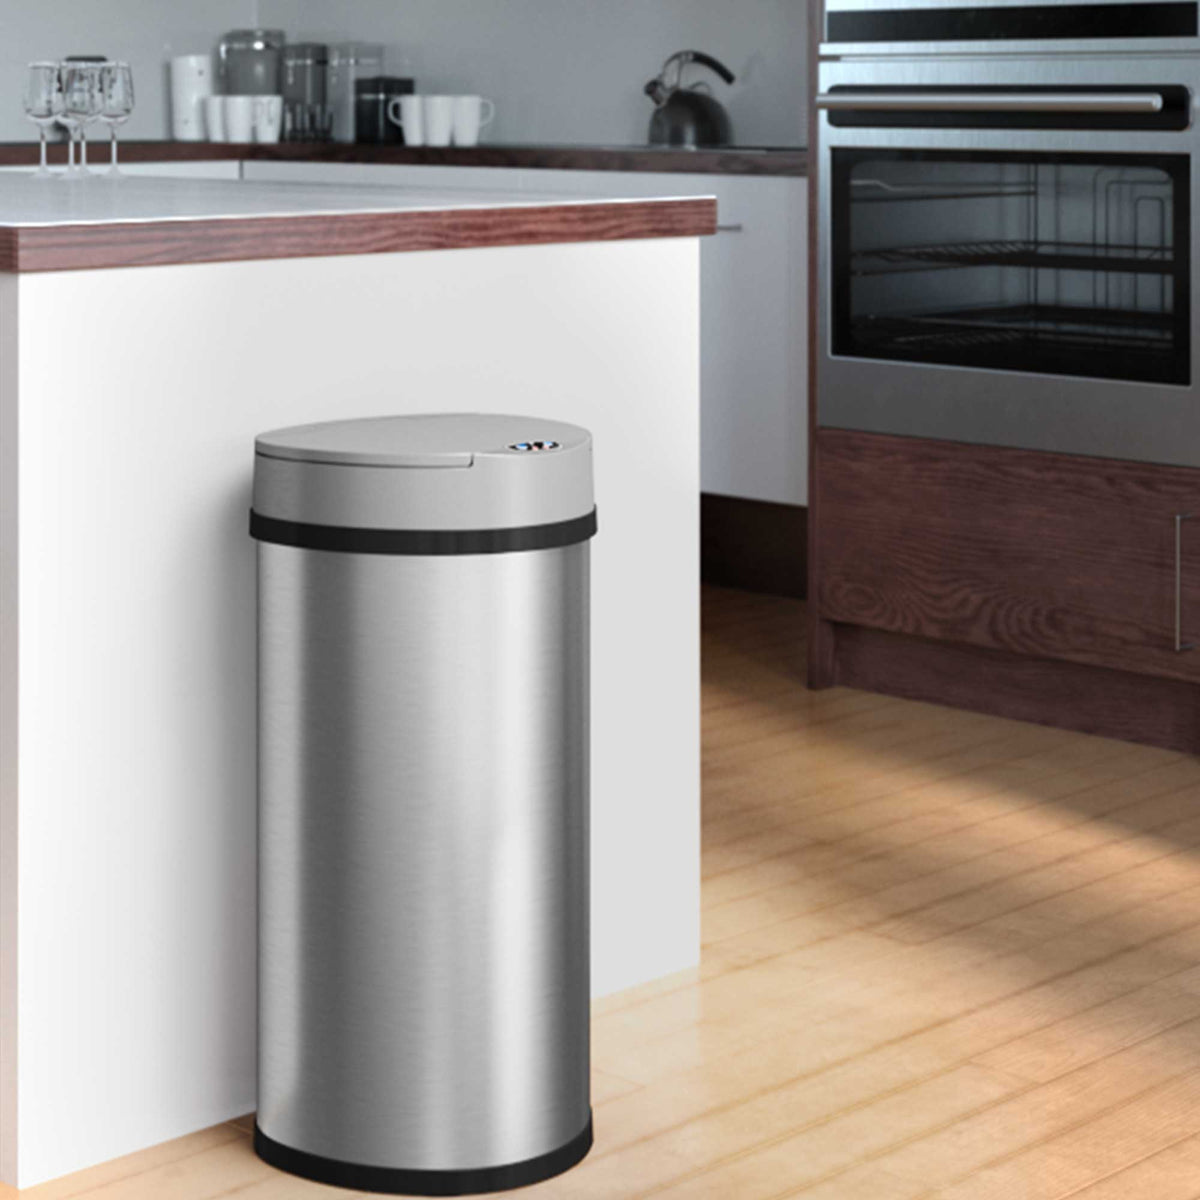 13 Gallon Semi-Round Stainless Steel Sensor Trash Can with Odor Filter in kitchen